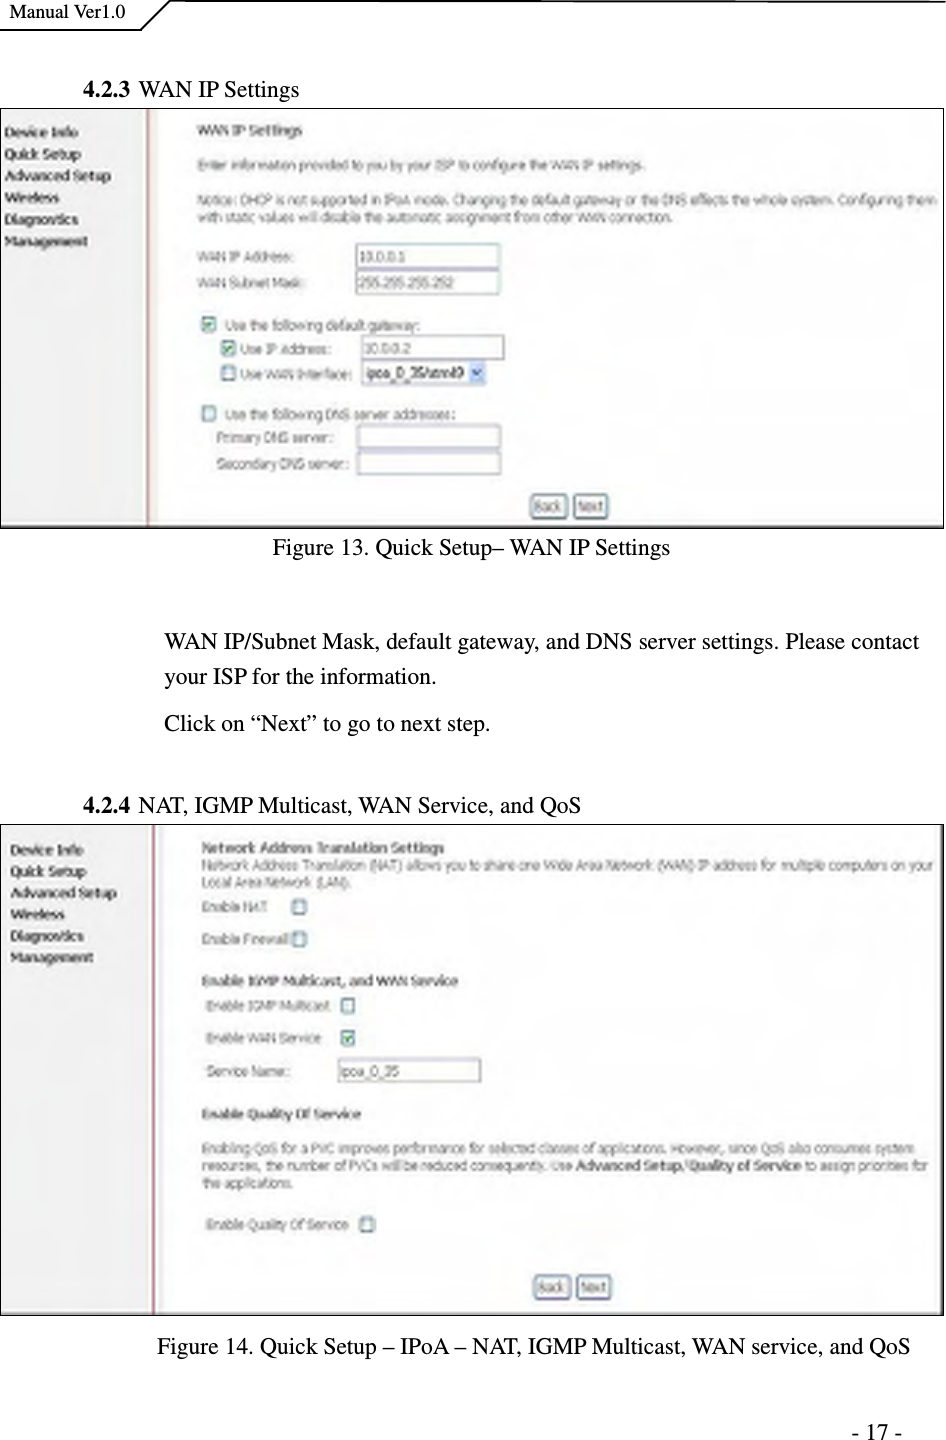    Manual Ver1.0                                                                      - 17 -  4.2.3 WAN IP Settings Figure 13. Quick Setup– WAN IP Settings  WAN IP/Subnet Mask, default gateway, and DNS server settings. Please contact your ISP for the information. Click on “Next” to go to next step.  4.2.4 NAT, IGMP Multicast, WAN Service, and QoS  Figure 14. Quick Setup – IPoA – NAT, IGMP Multicast, WAN service, and QoS 